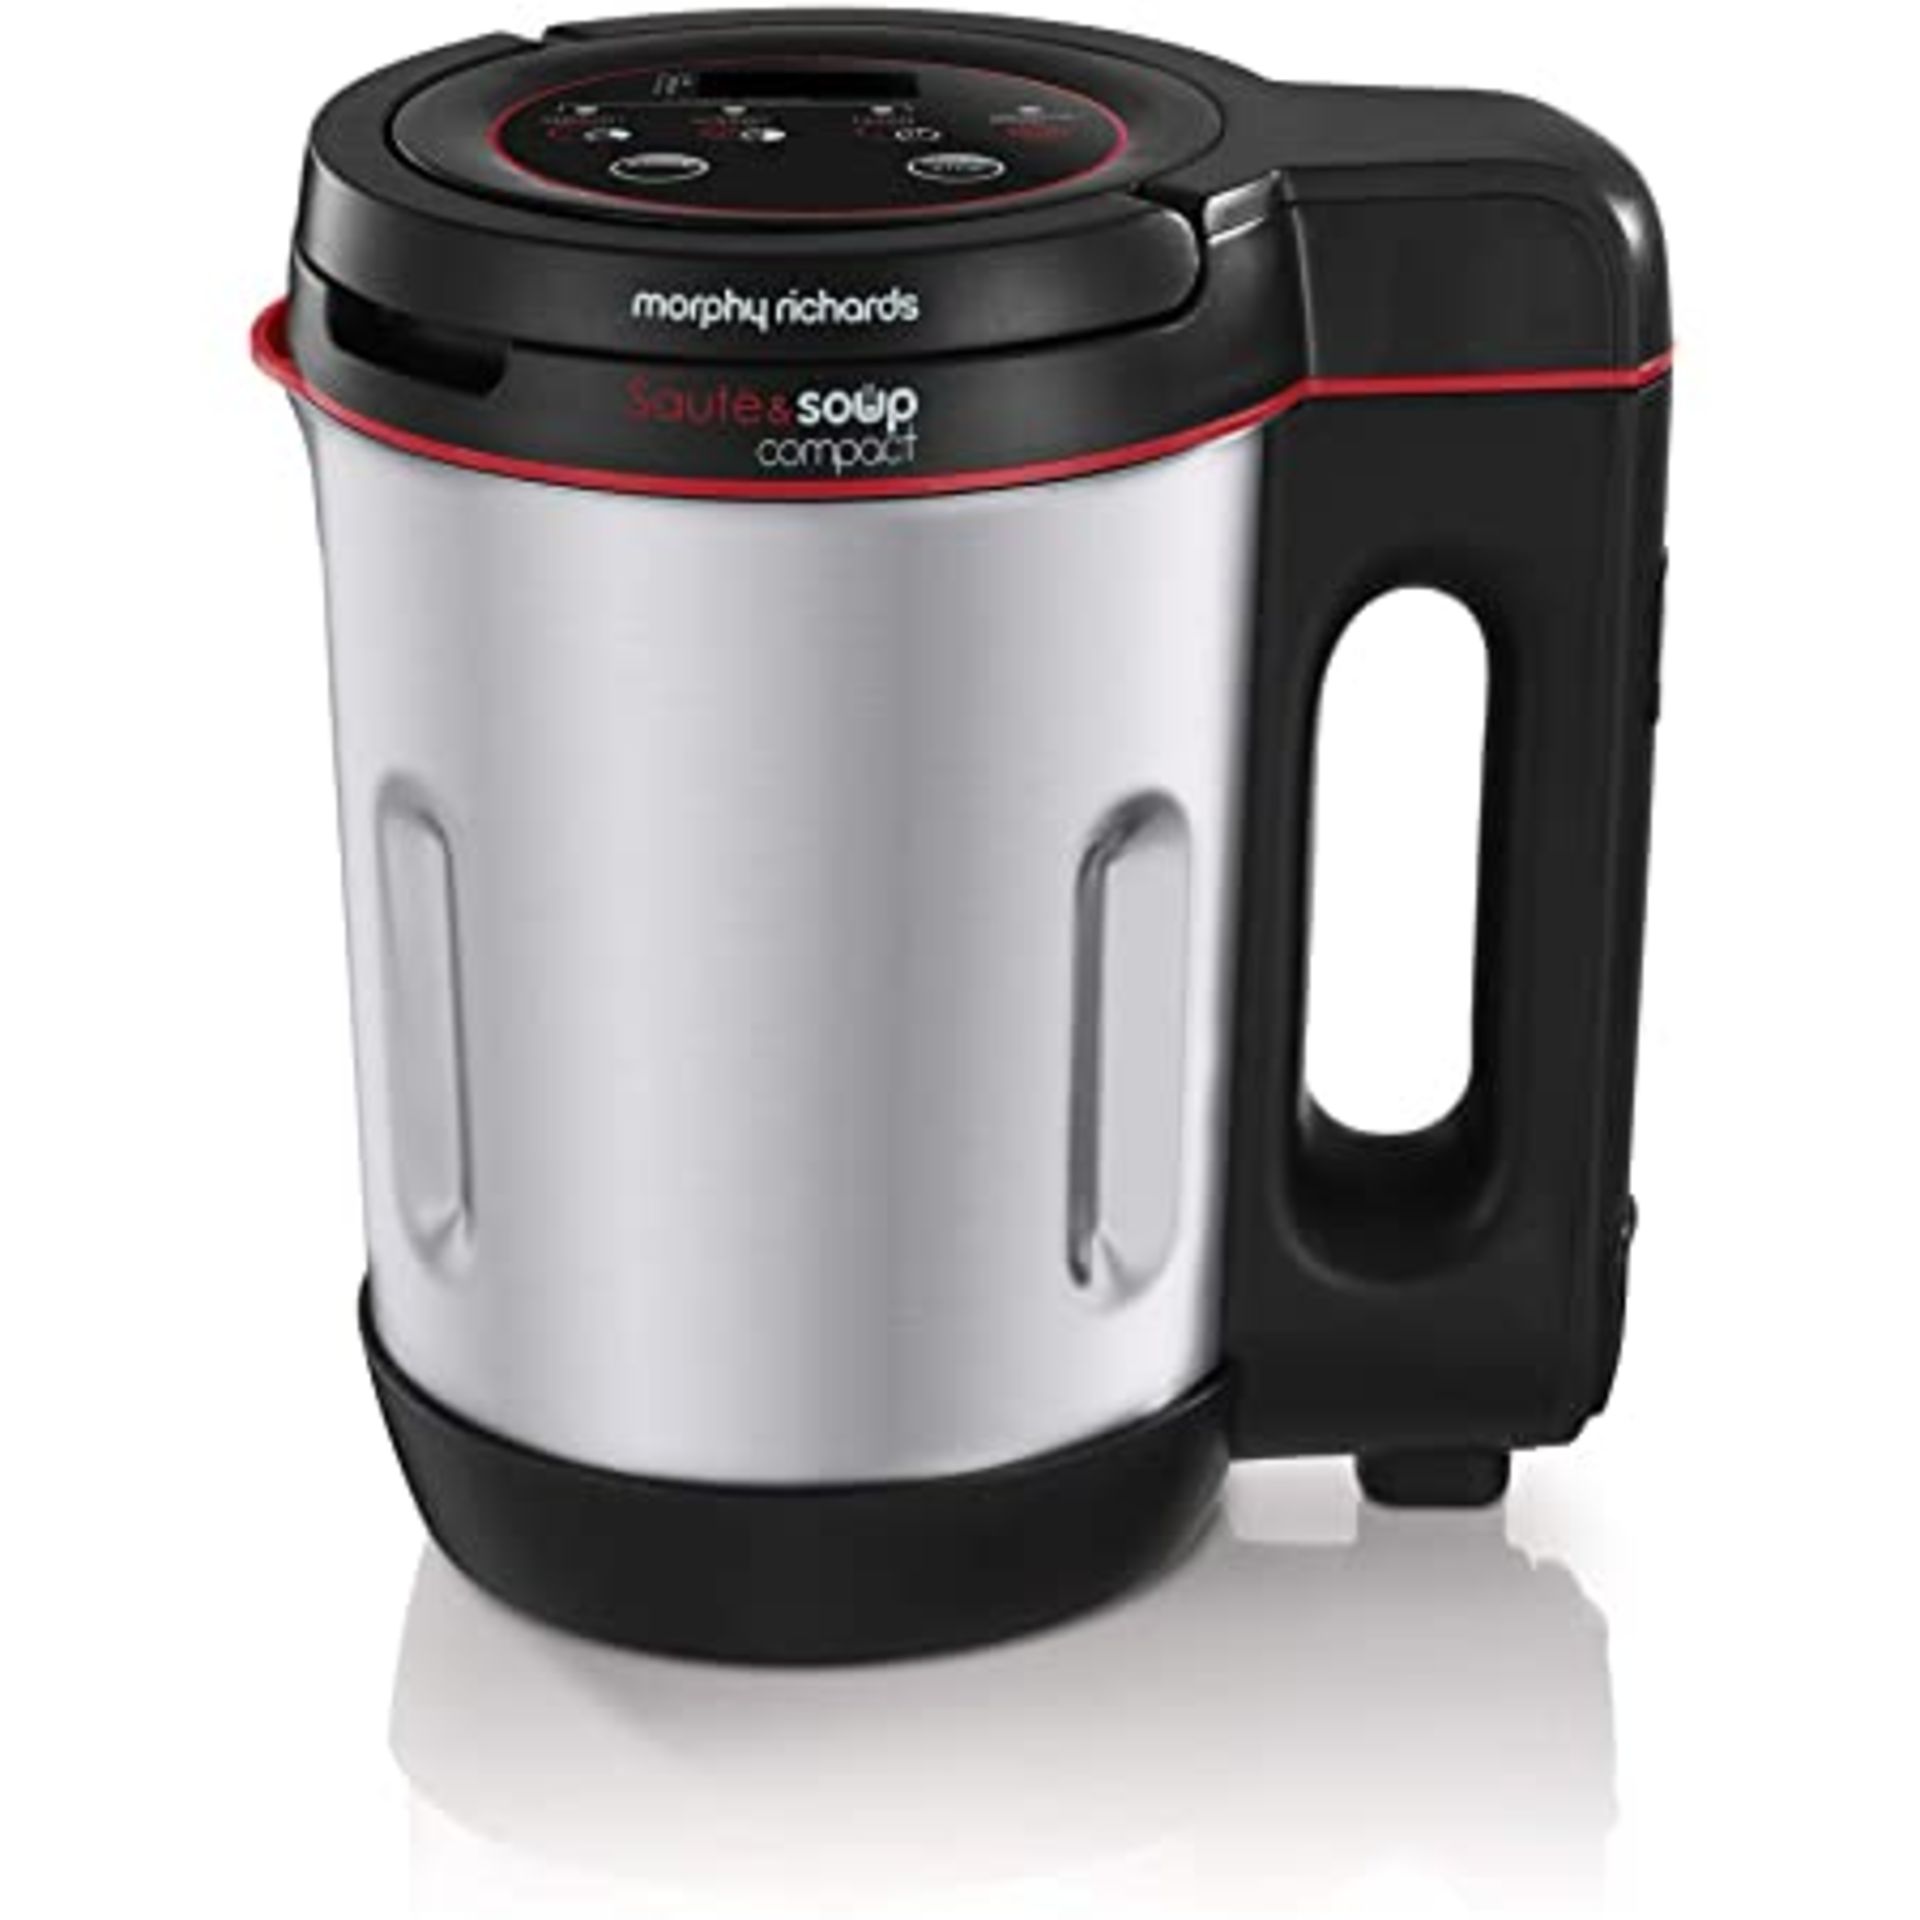 RRP - £66.00 Morphy Richards Saute and Soup Maker 501014 Brushed Stainless Steel